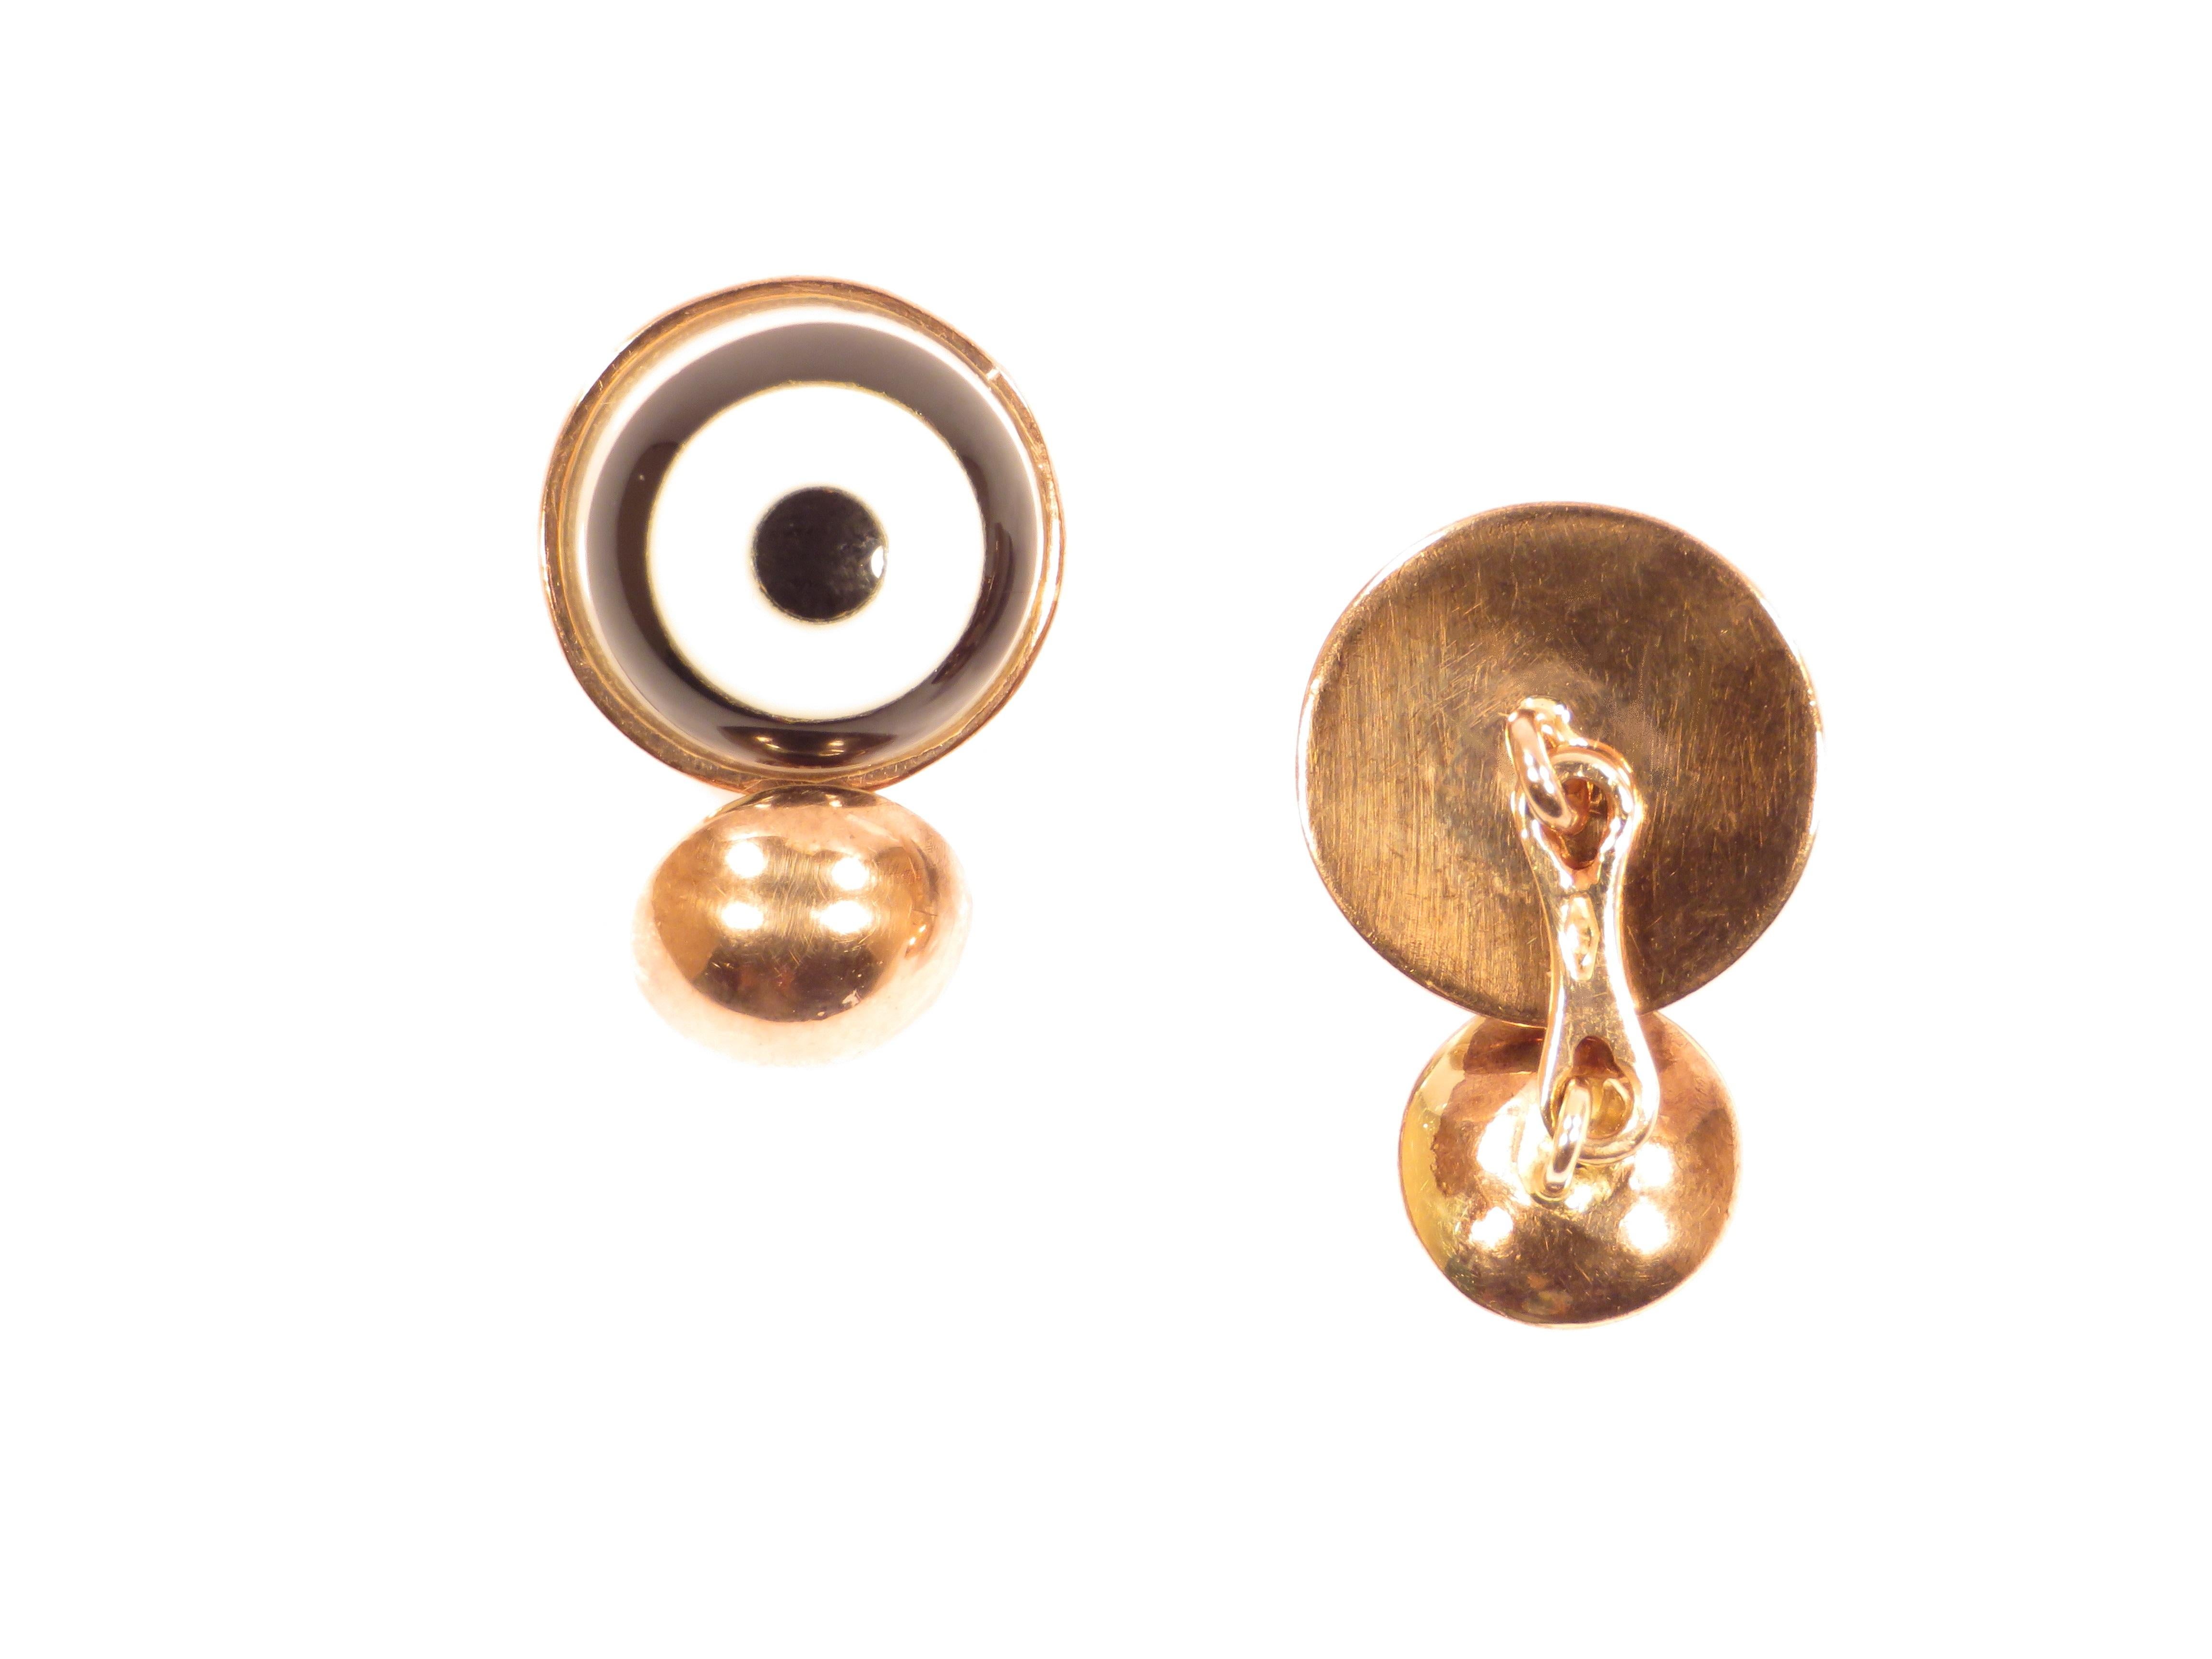 Cufflinks in 9k rose gold with white agate and onyx round button. Gemstone diameter is 16 millimeters / 0.629 inches and backside round gold button diameter is 10 millimeters / 0.393 inches.
These cufflinks are marked with the Italian Gold Mark 375